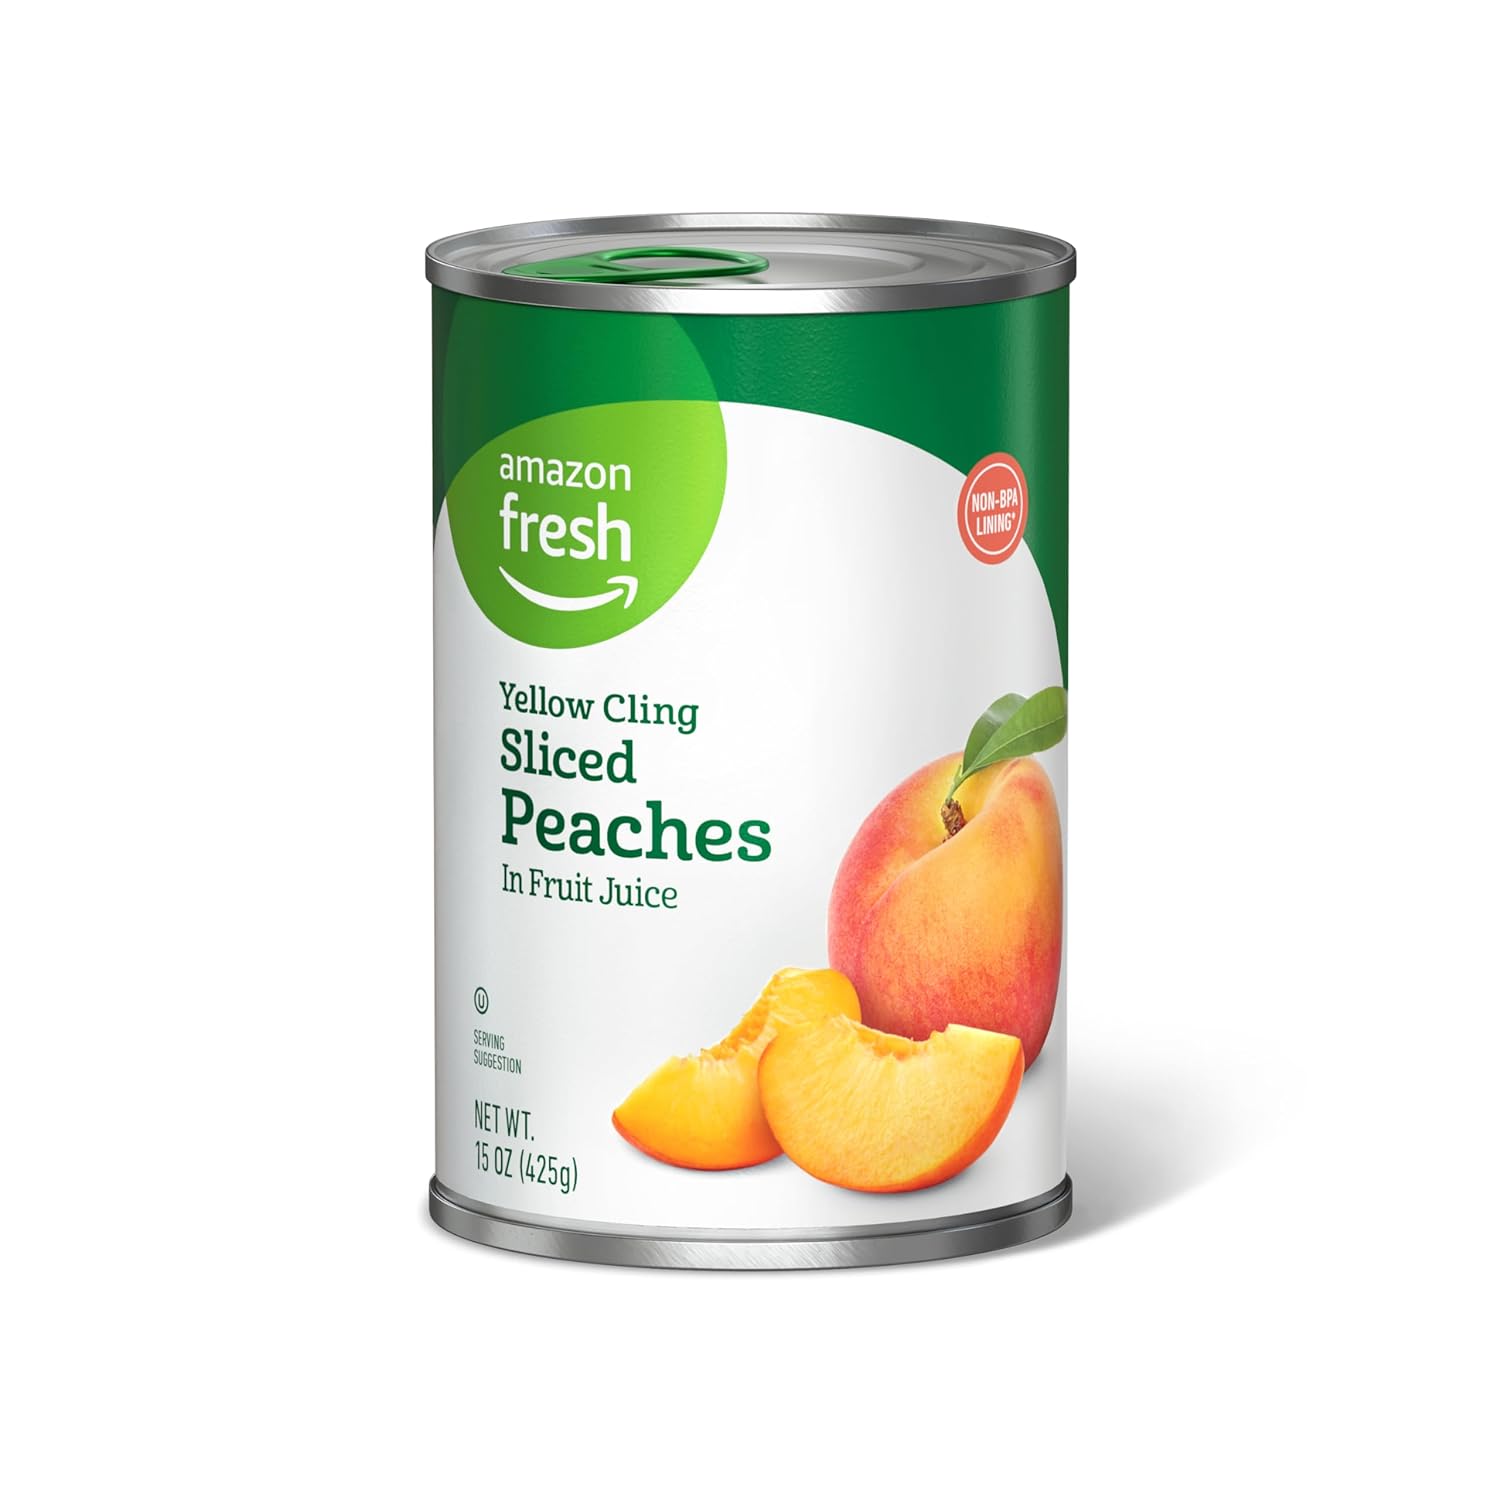 Amazon Fresh, Yellow Cling Sliced Peaches in Fruit Juice, 15 Oz (Previously Happy Belly, Packaging May Vary)